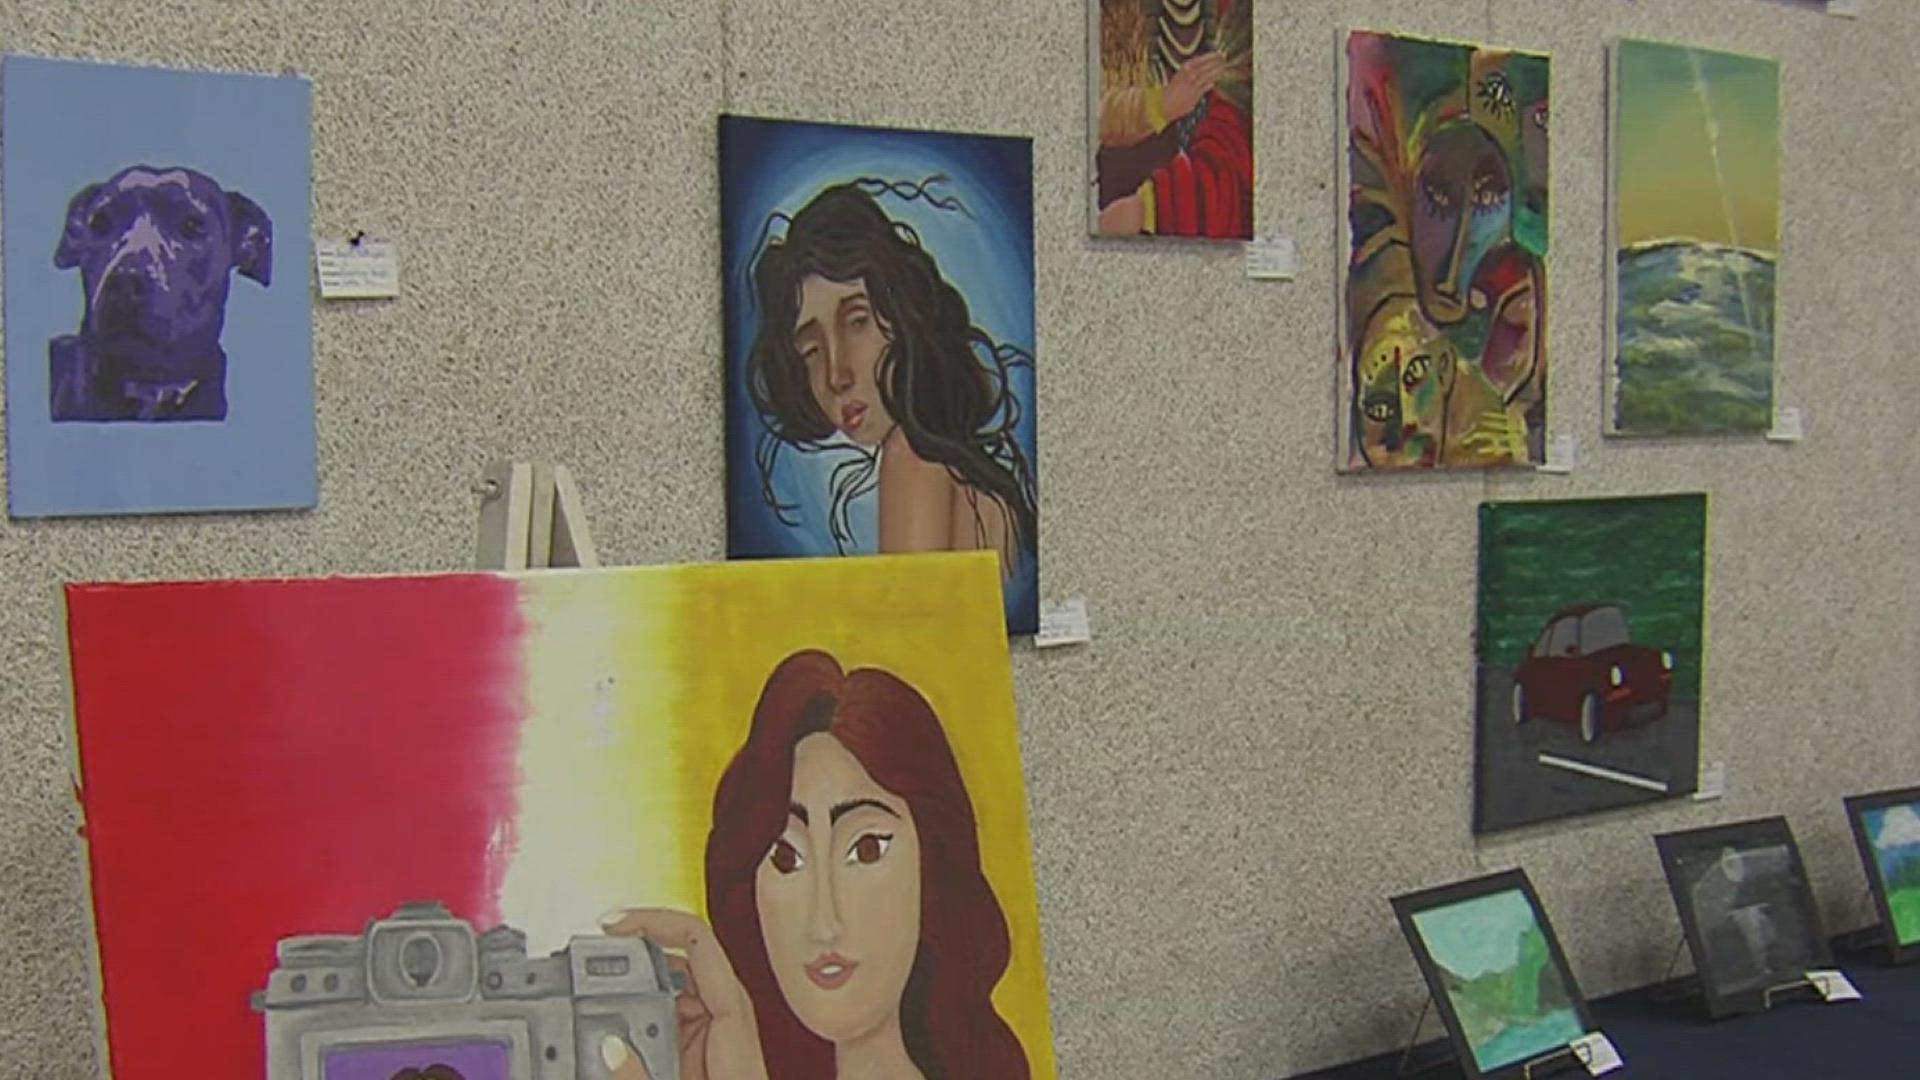 The event allows students from all catholic schools in the diocese to cultivate a unique voice by submitting their art.